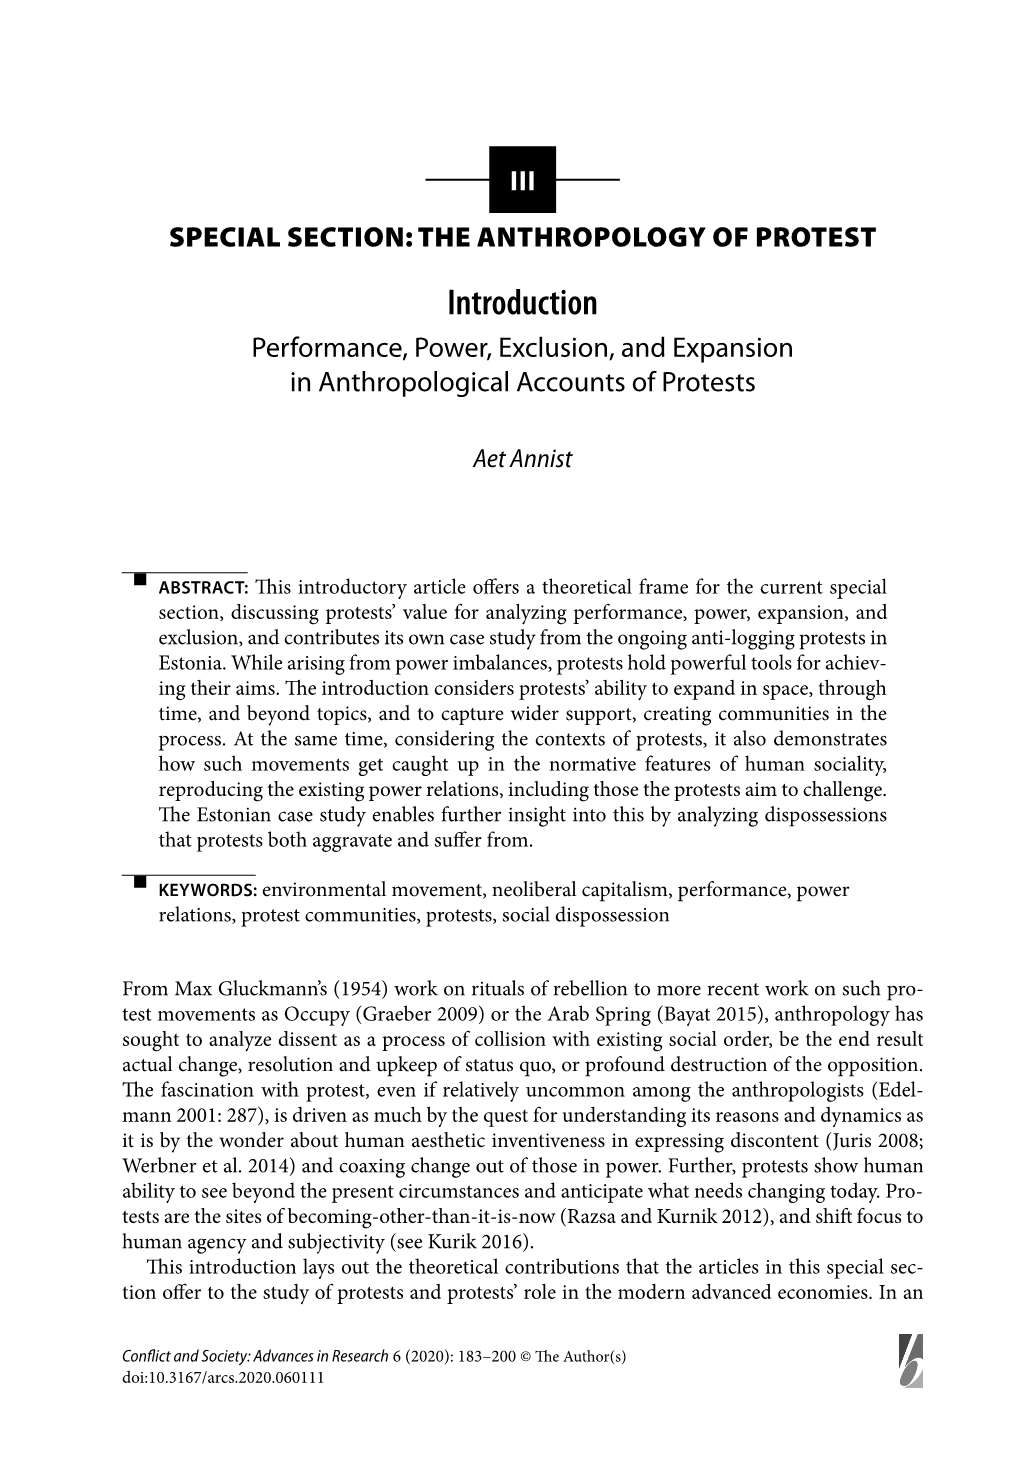 Introduction Performance, Power, Exclusion, and Expansion in Anthropological Accounts of Protests